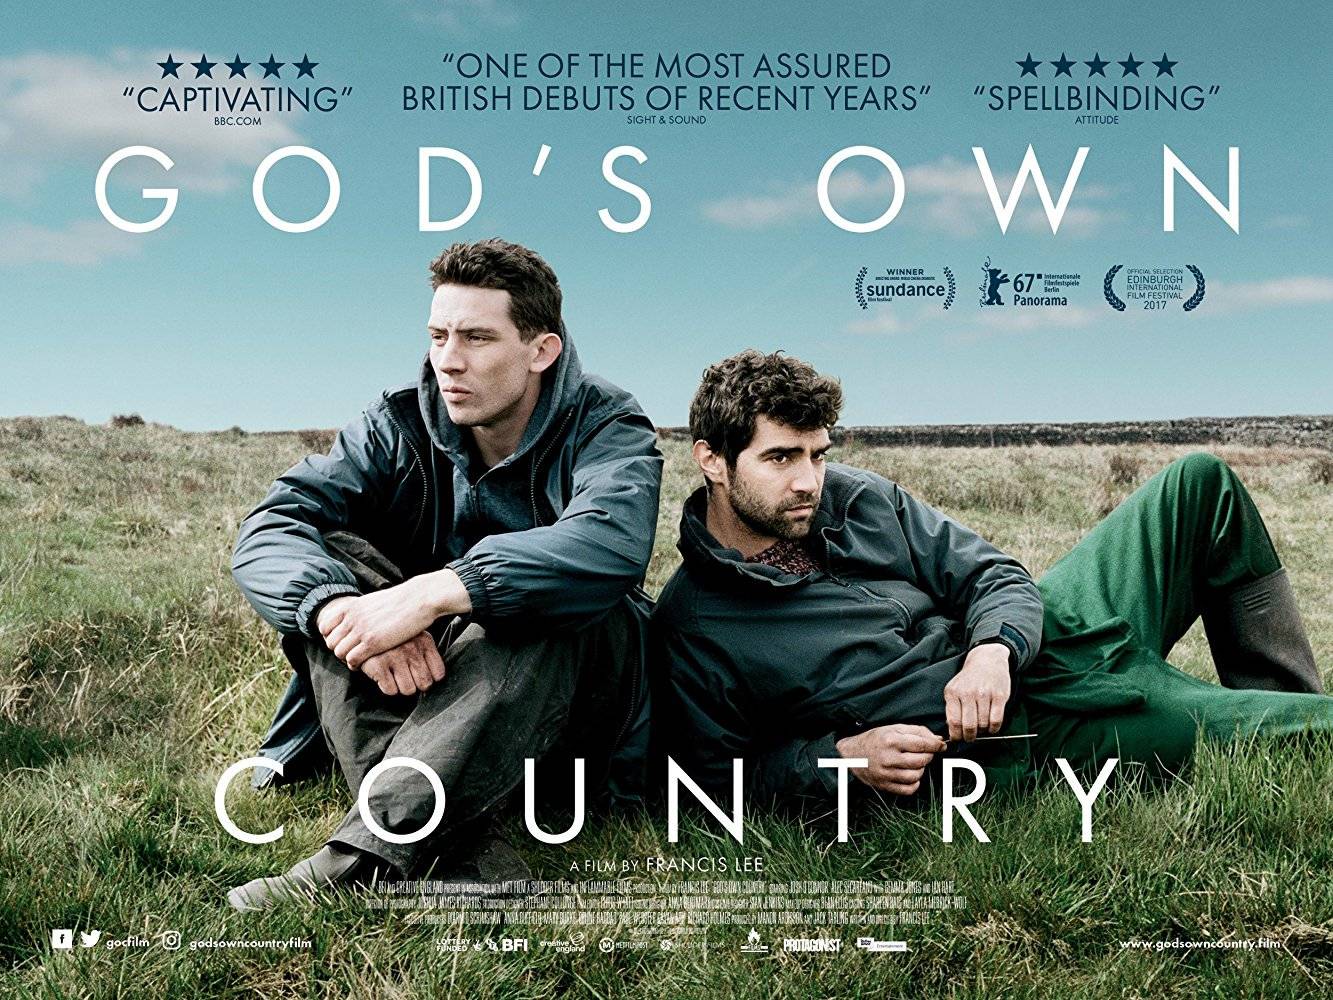 God's Own Country (2017) (2017)